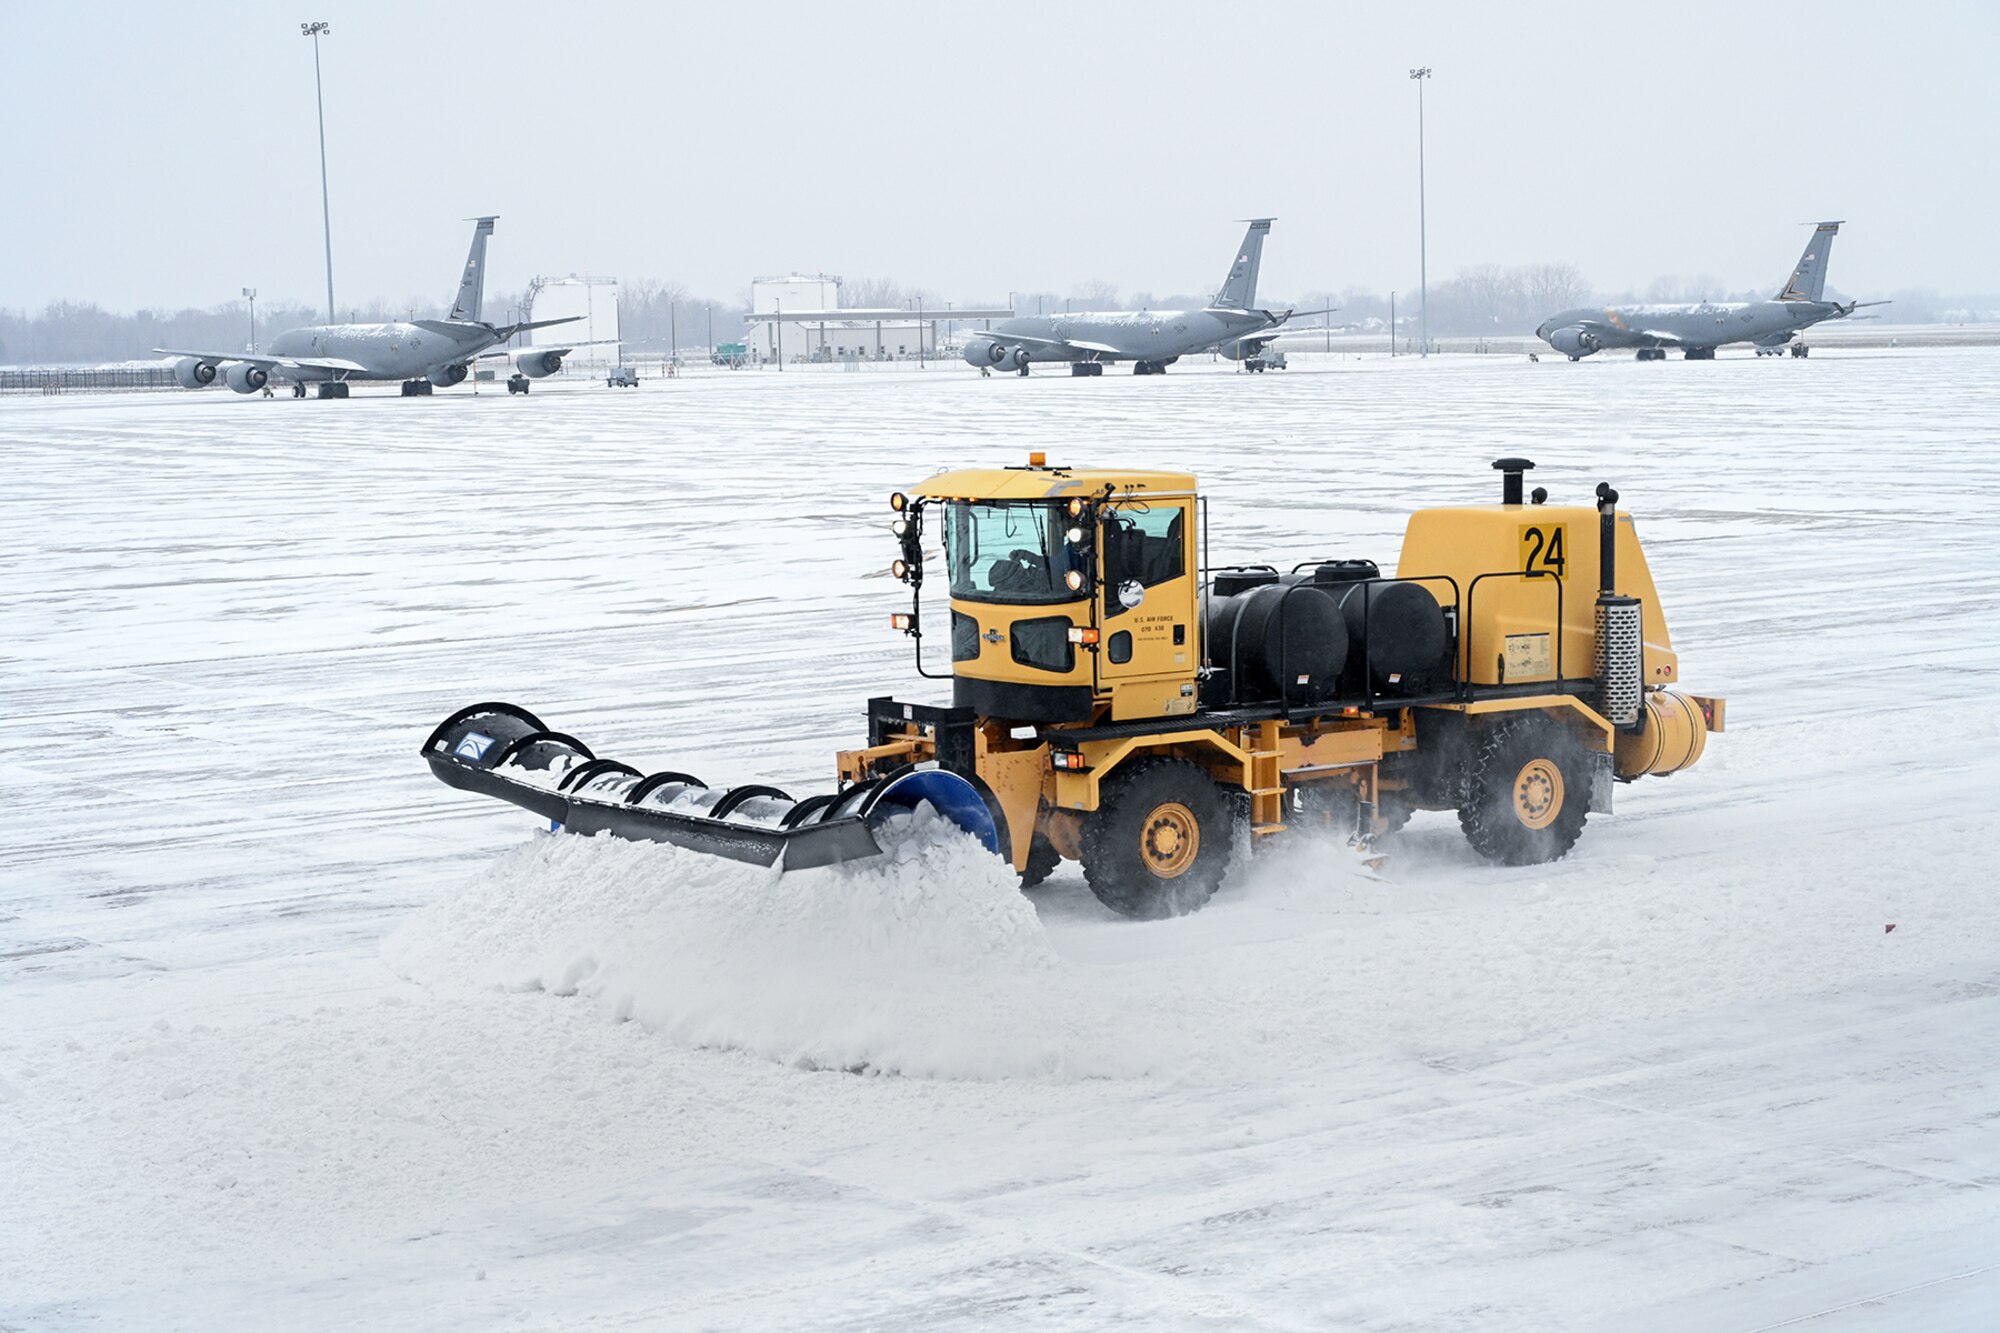 Large snow plow on airport flight line with aircraft in the background.